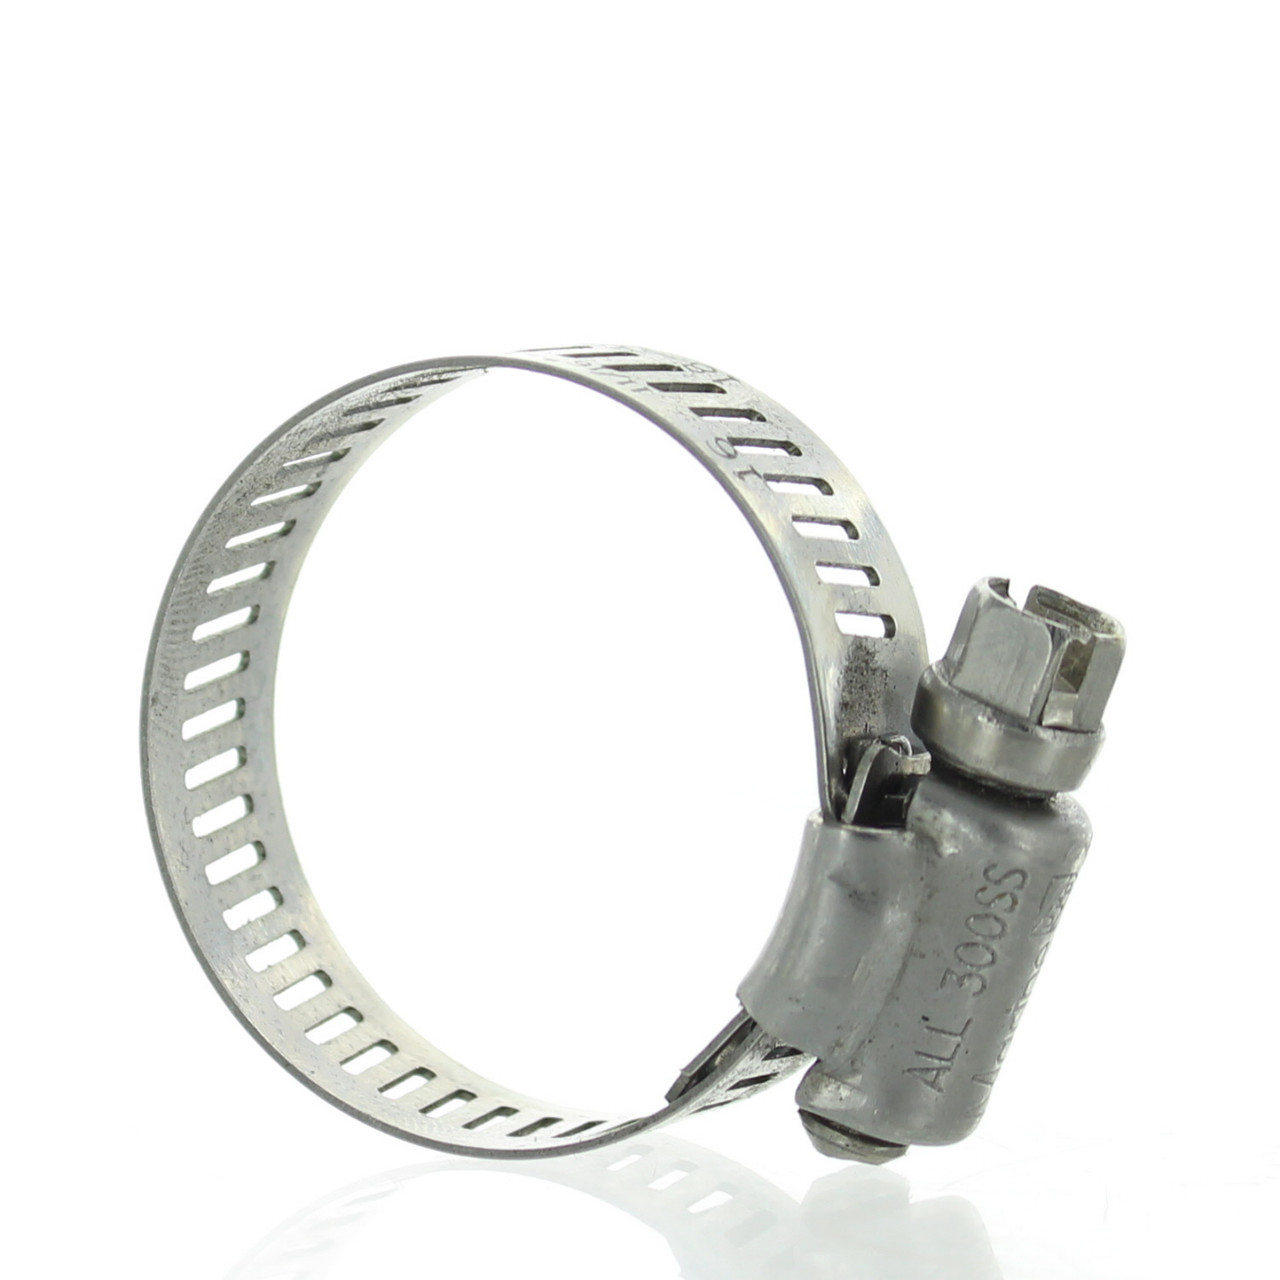 Larson Boats New OEM Stainless Steel Hose Clamp 3/4" -1 1/2 inch, 6144-9052